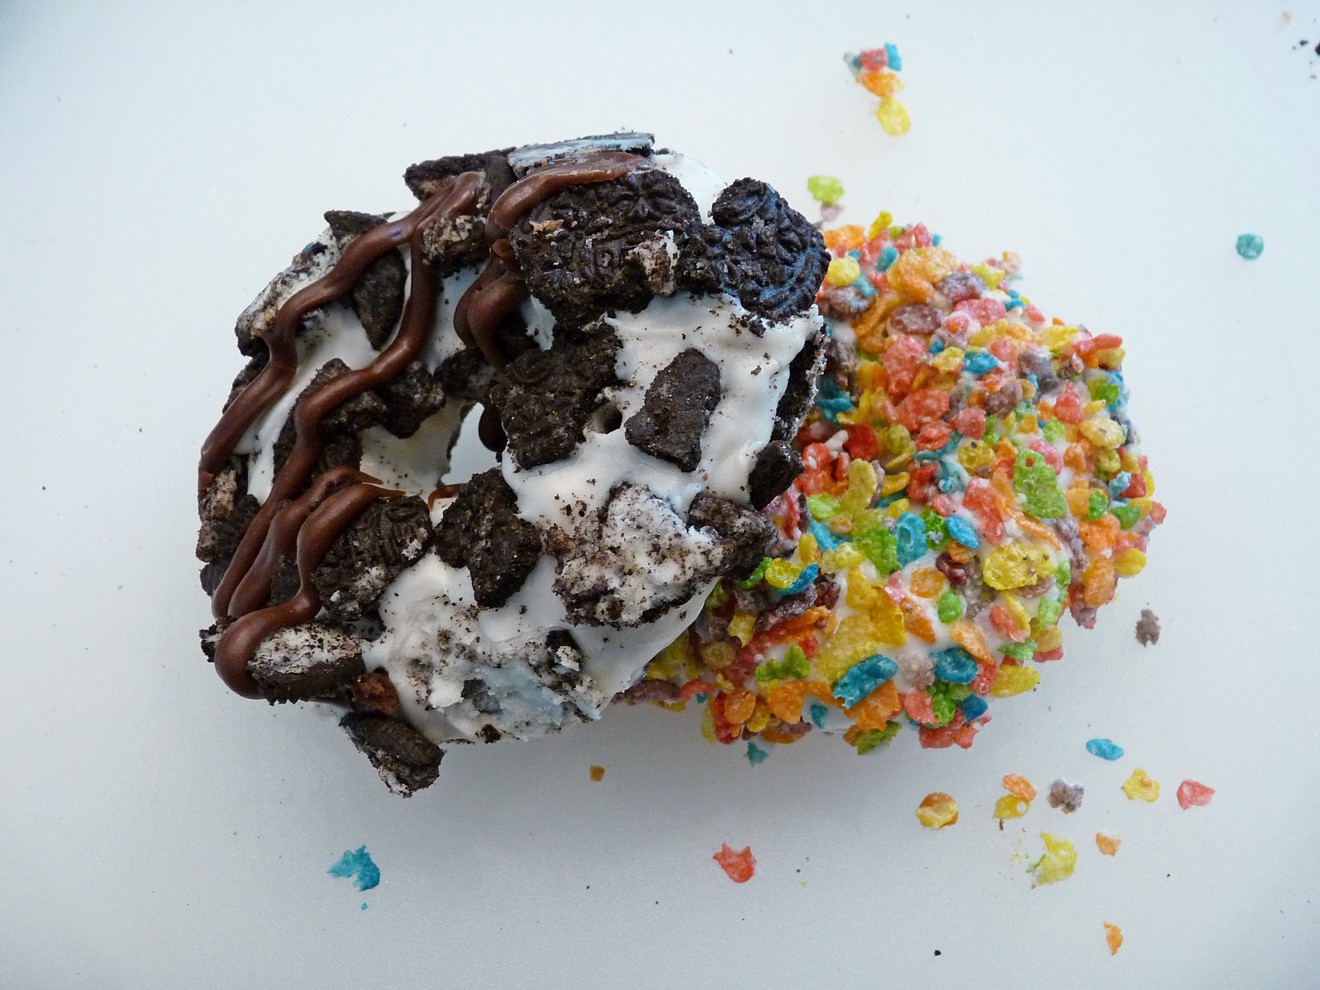 Cookies & Cream and Fred Flintstone are among some of the gourmet doughnuts made at Hurts Donut Company.